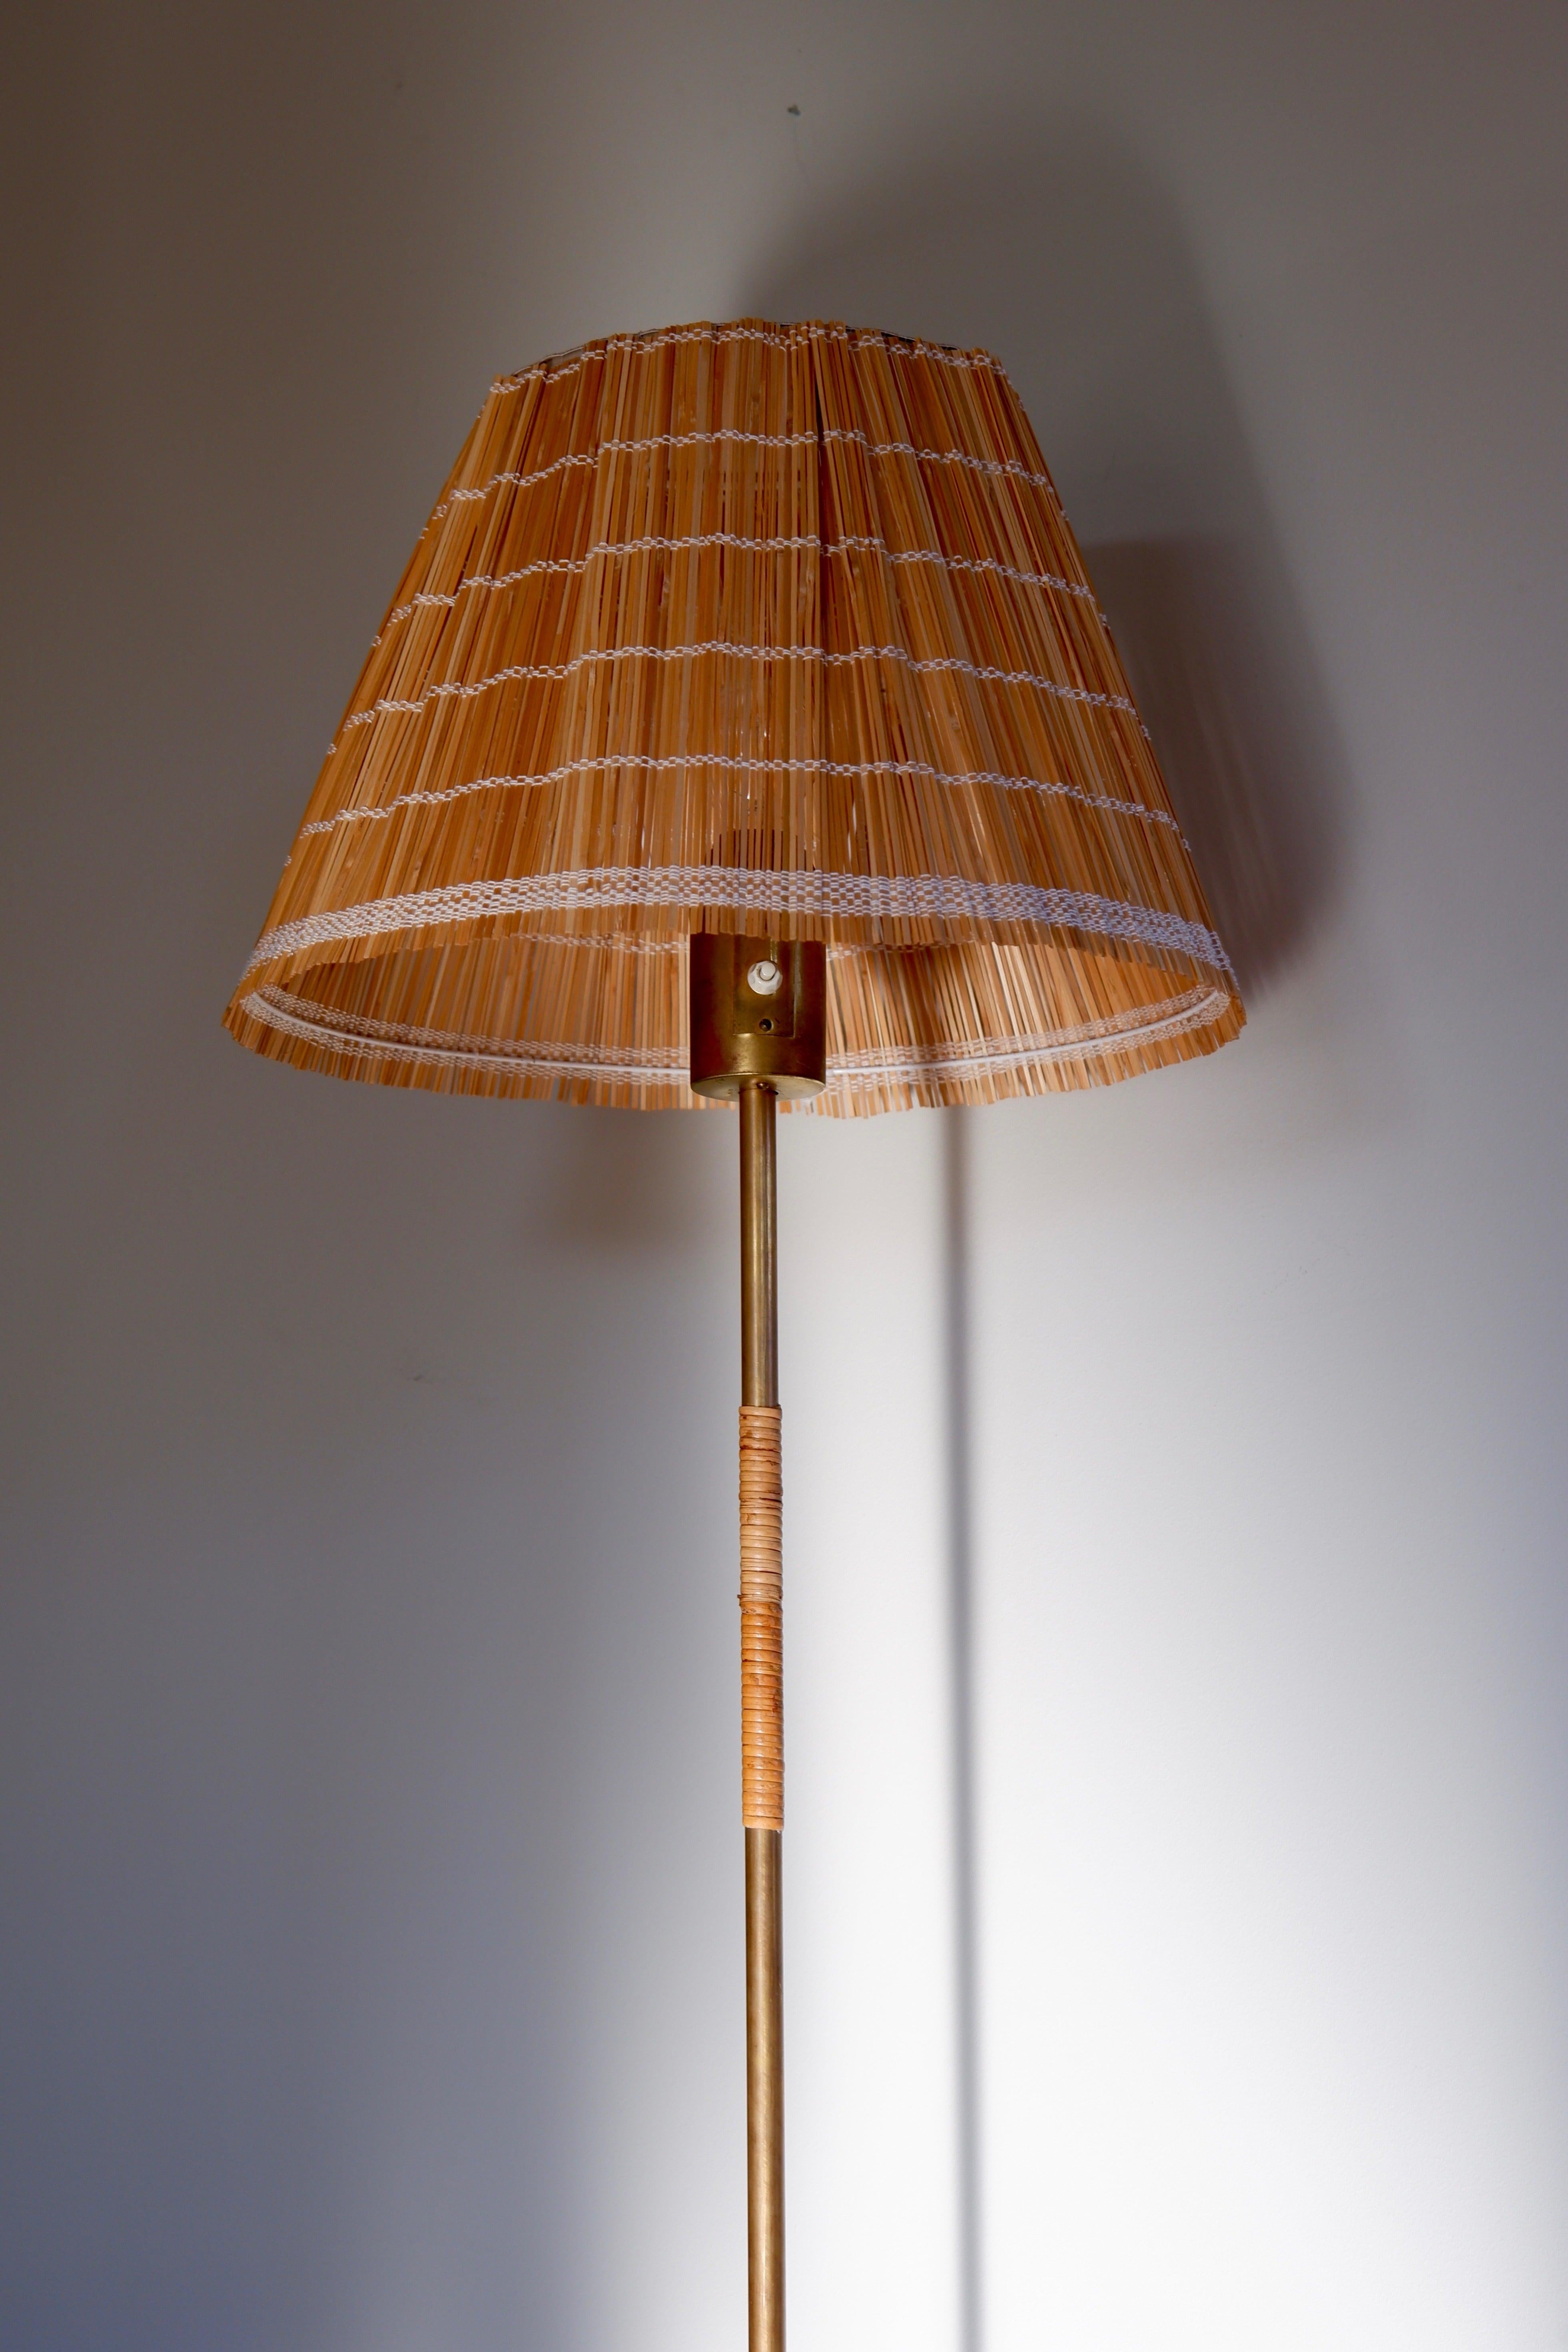 Impressive Paavo Tynell floor lamp design in the 1950s and produced by IDMAN. The fllor lamp has a brass feet, core and a head with a single lighting switch on top. the brass core is decorated with rattan which is orginal. The lamp is stamp by the